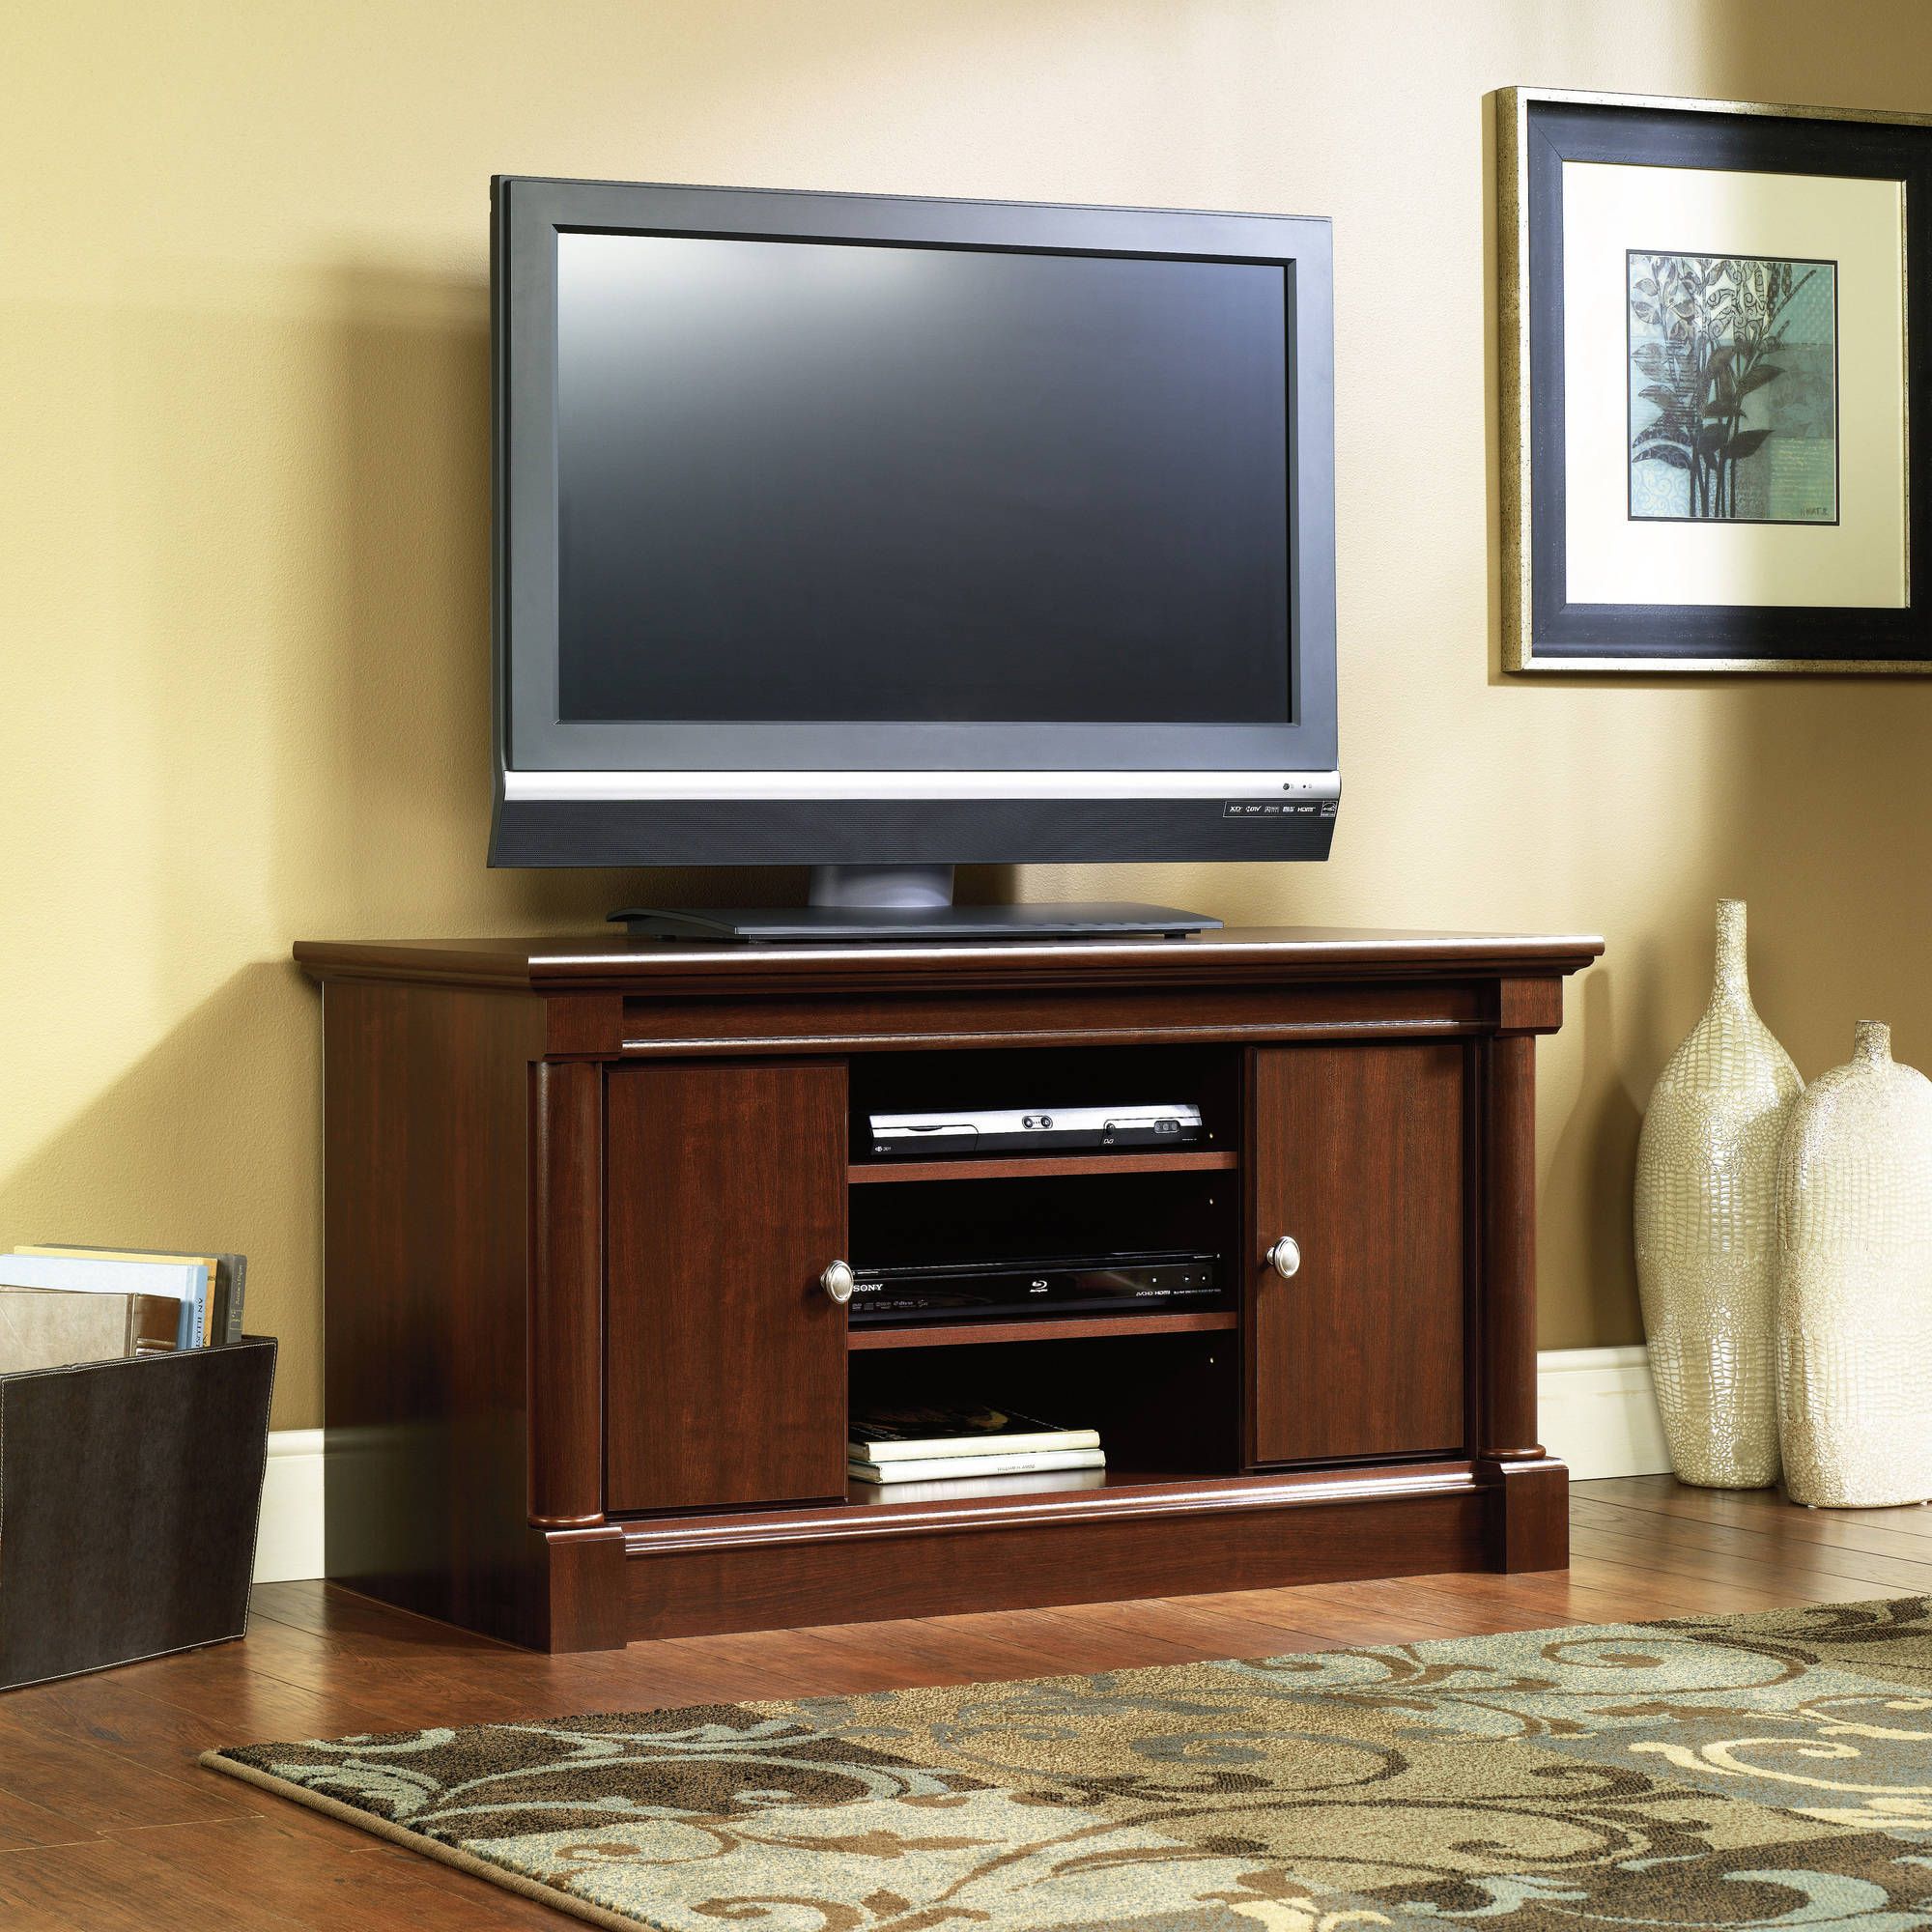 Sauder Cottage Road Tv Stand For Tvs Up To 50", Soft White For White Wood Tv Cabinets (View 7 of 15)